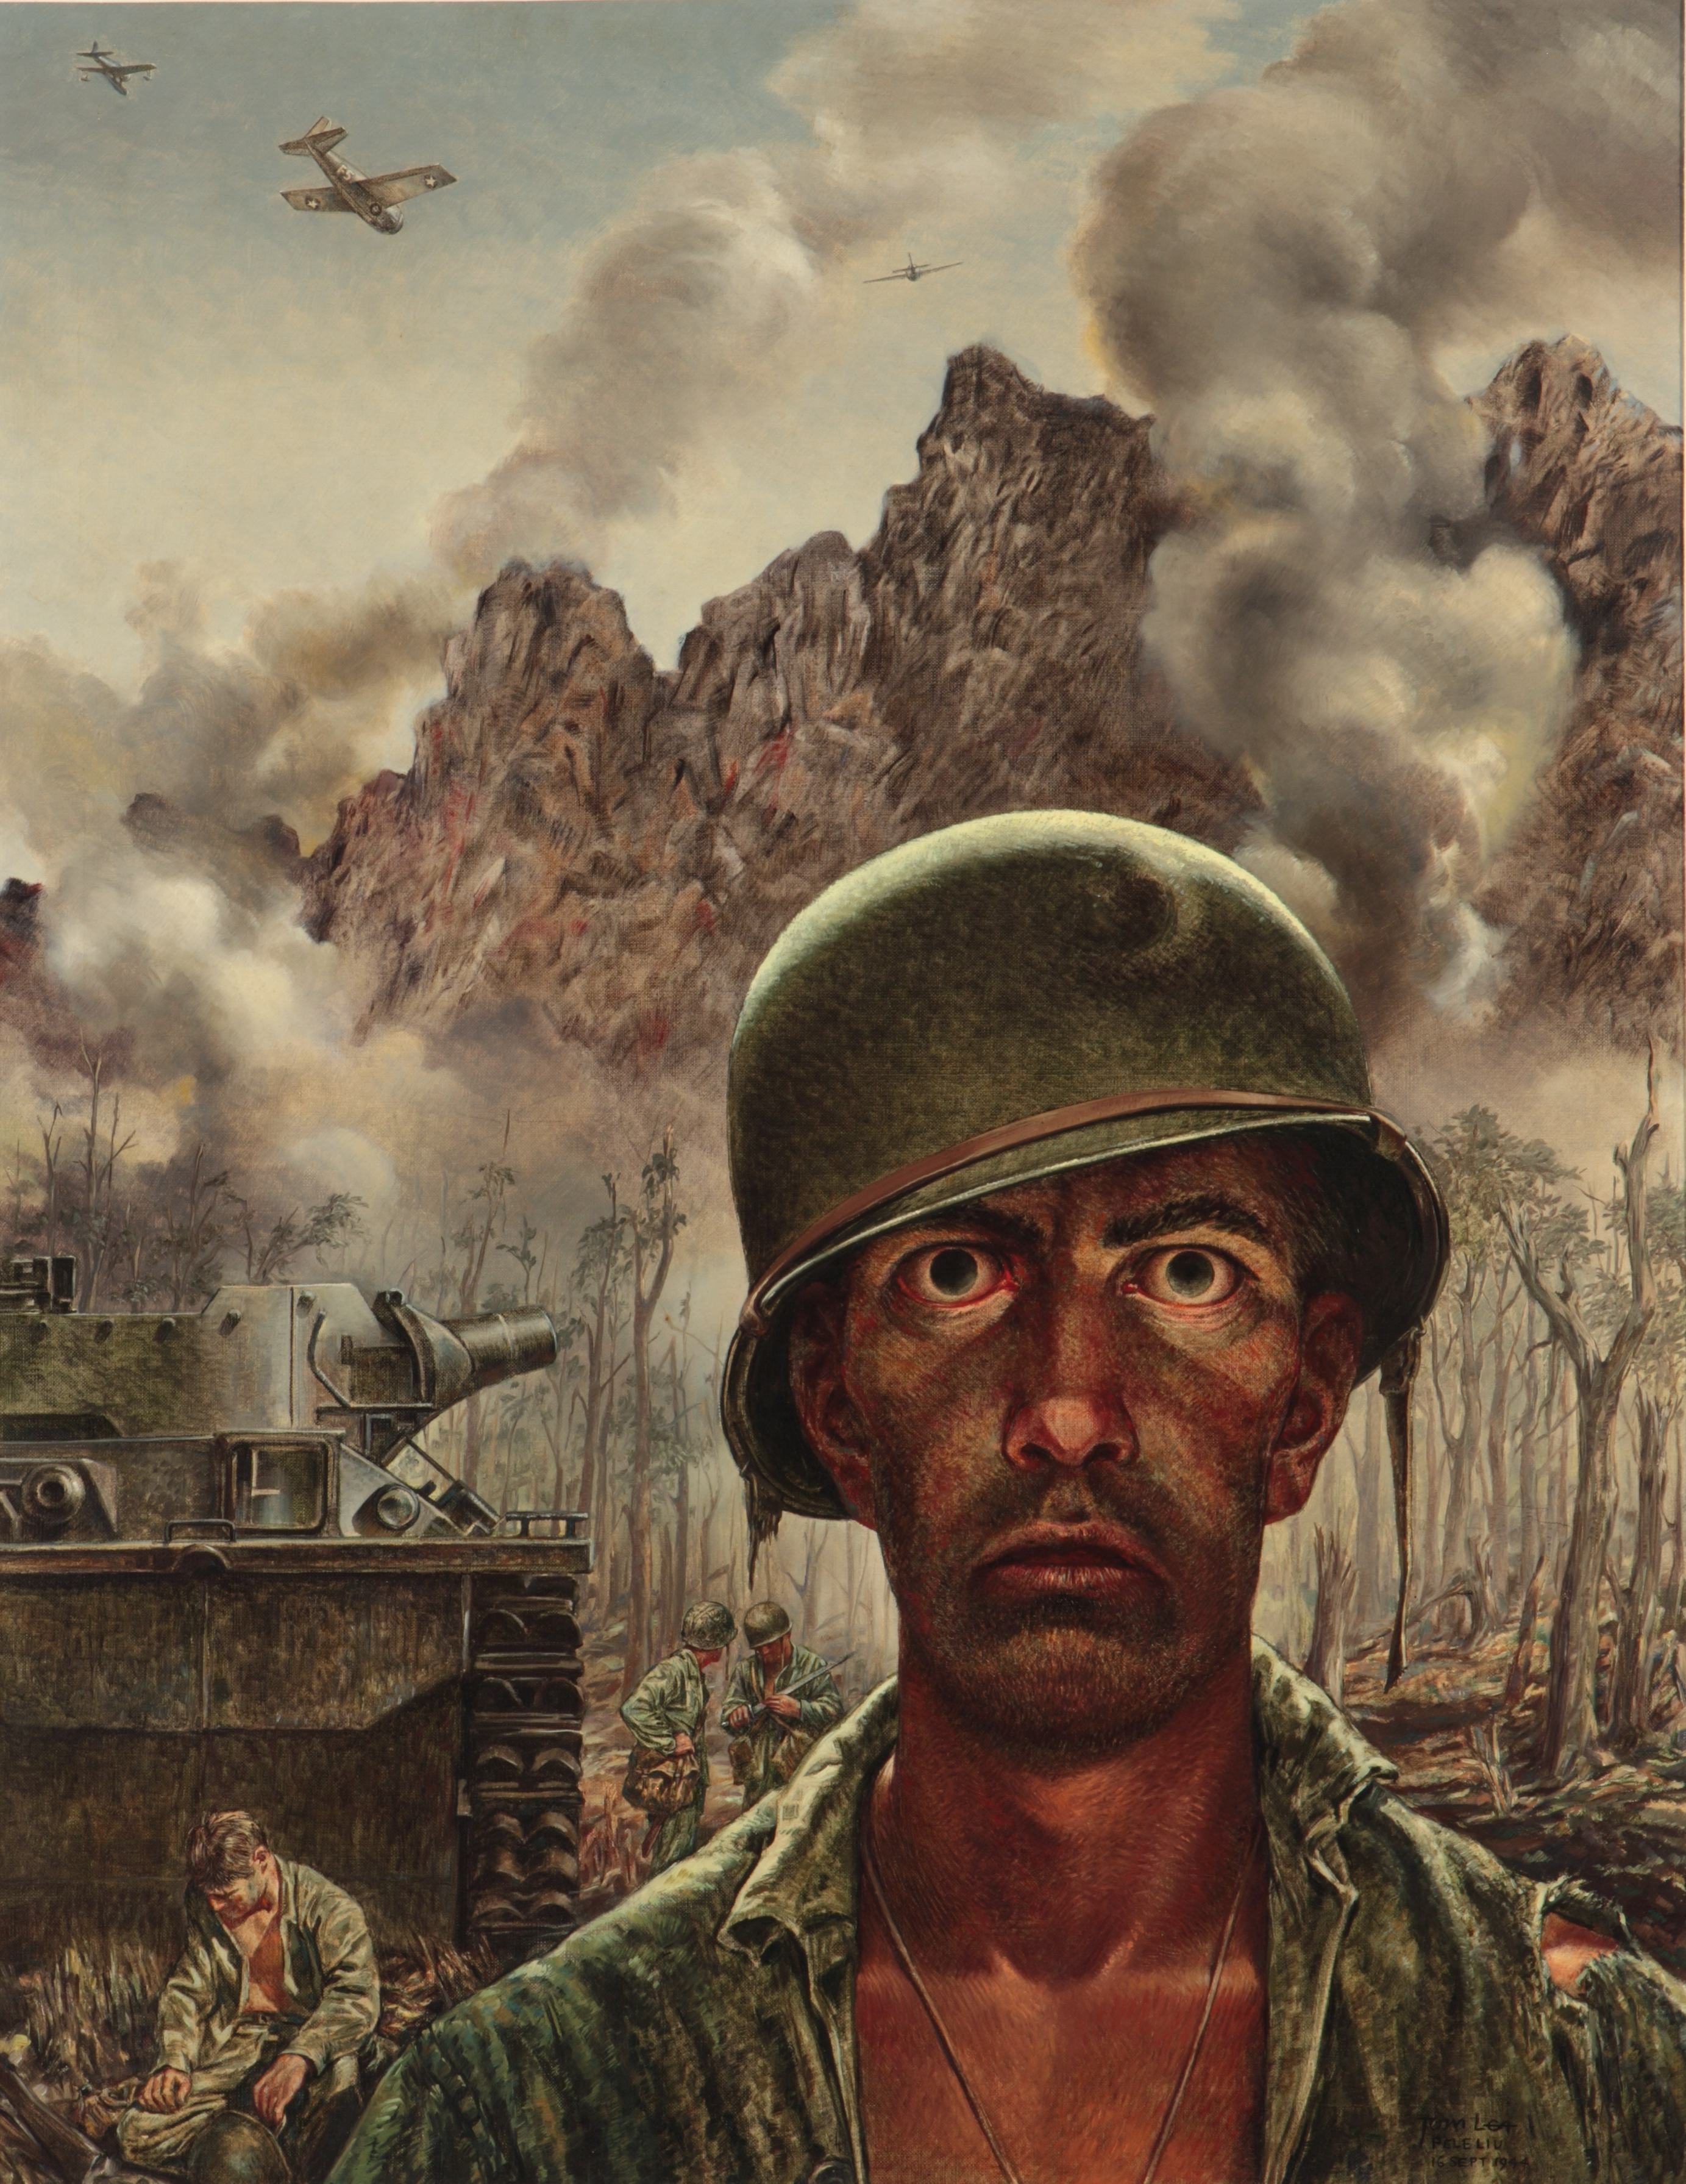 That 2,000 Yard Stare, Tom Lea painting (1944)